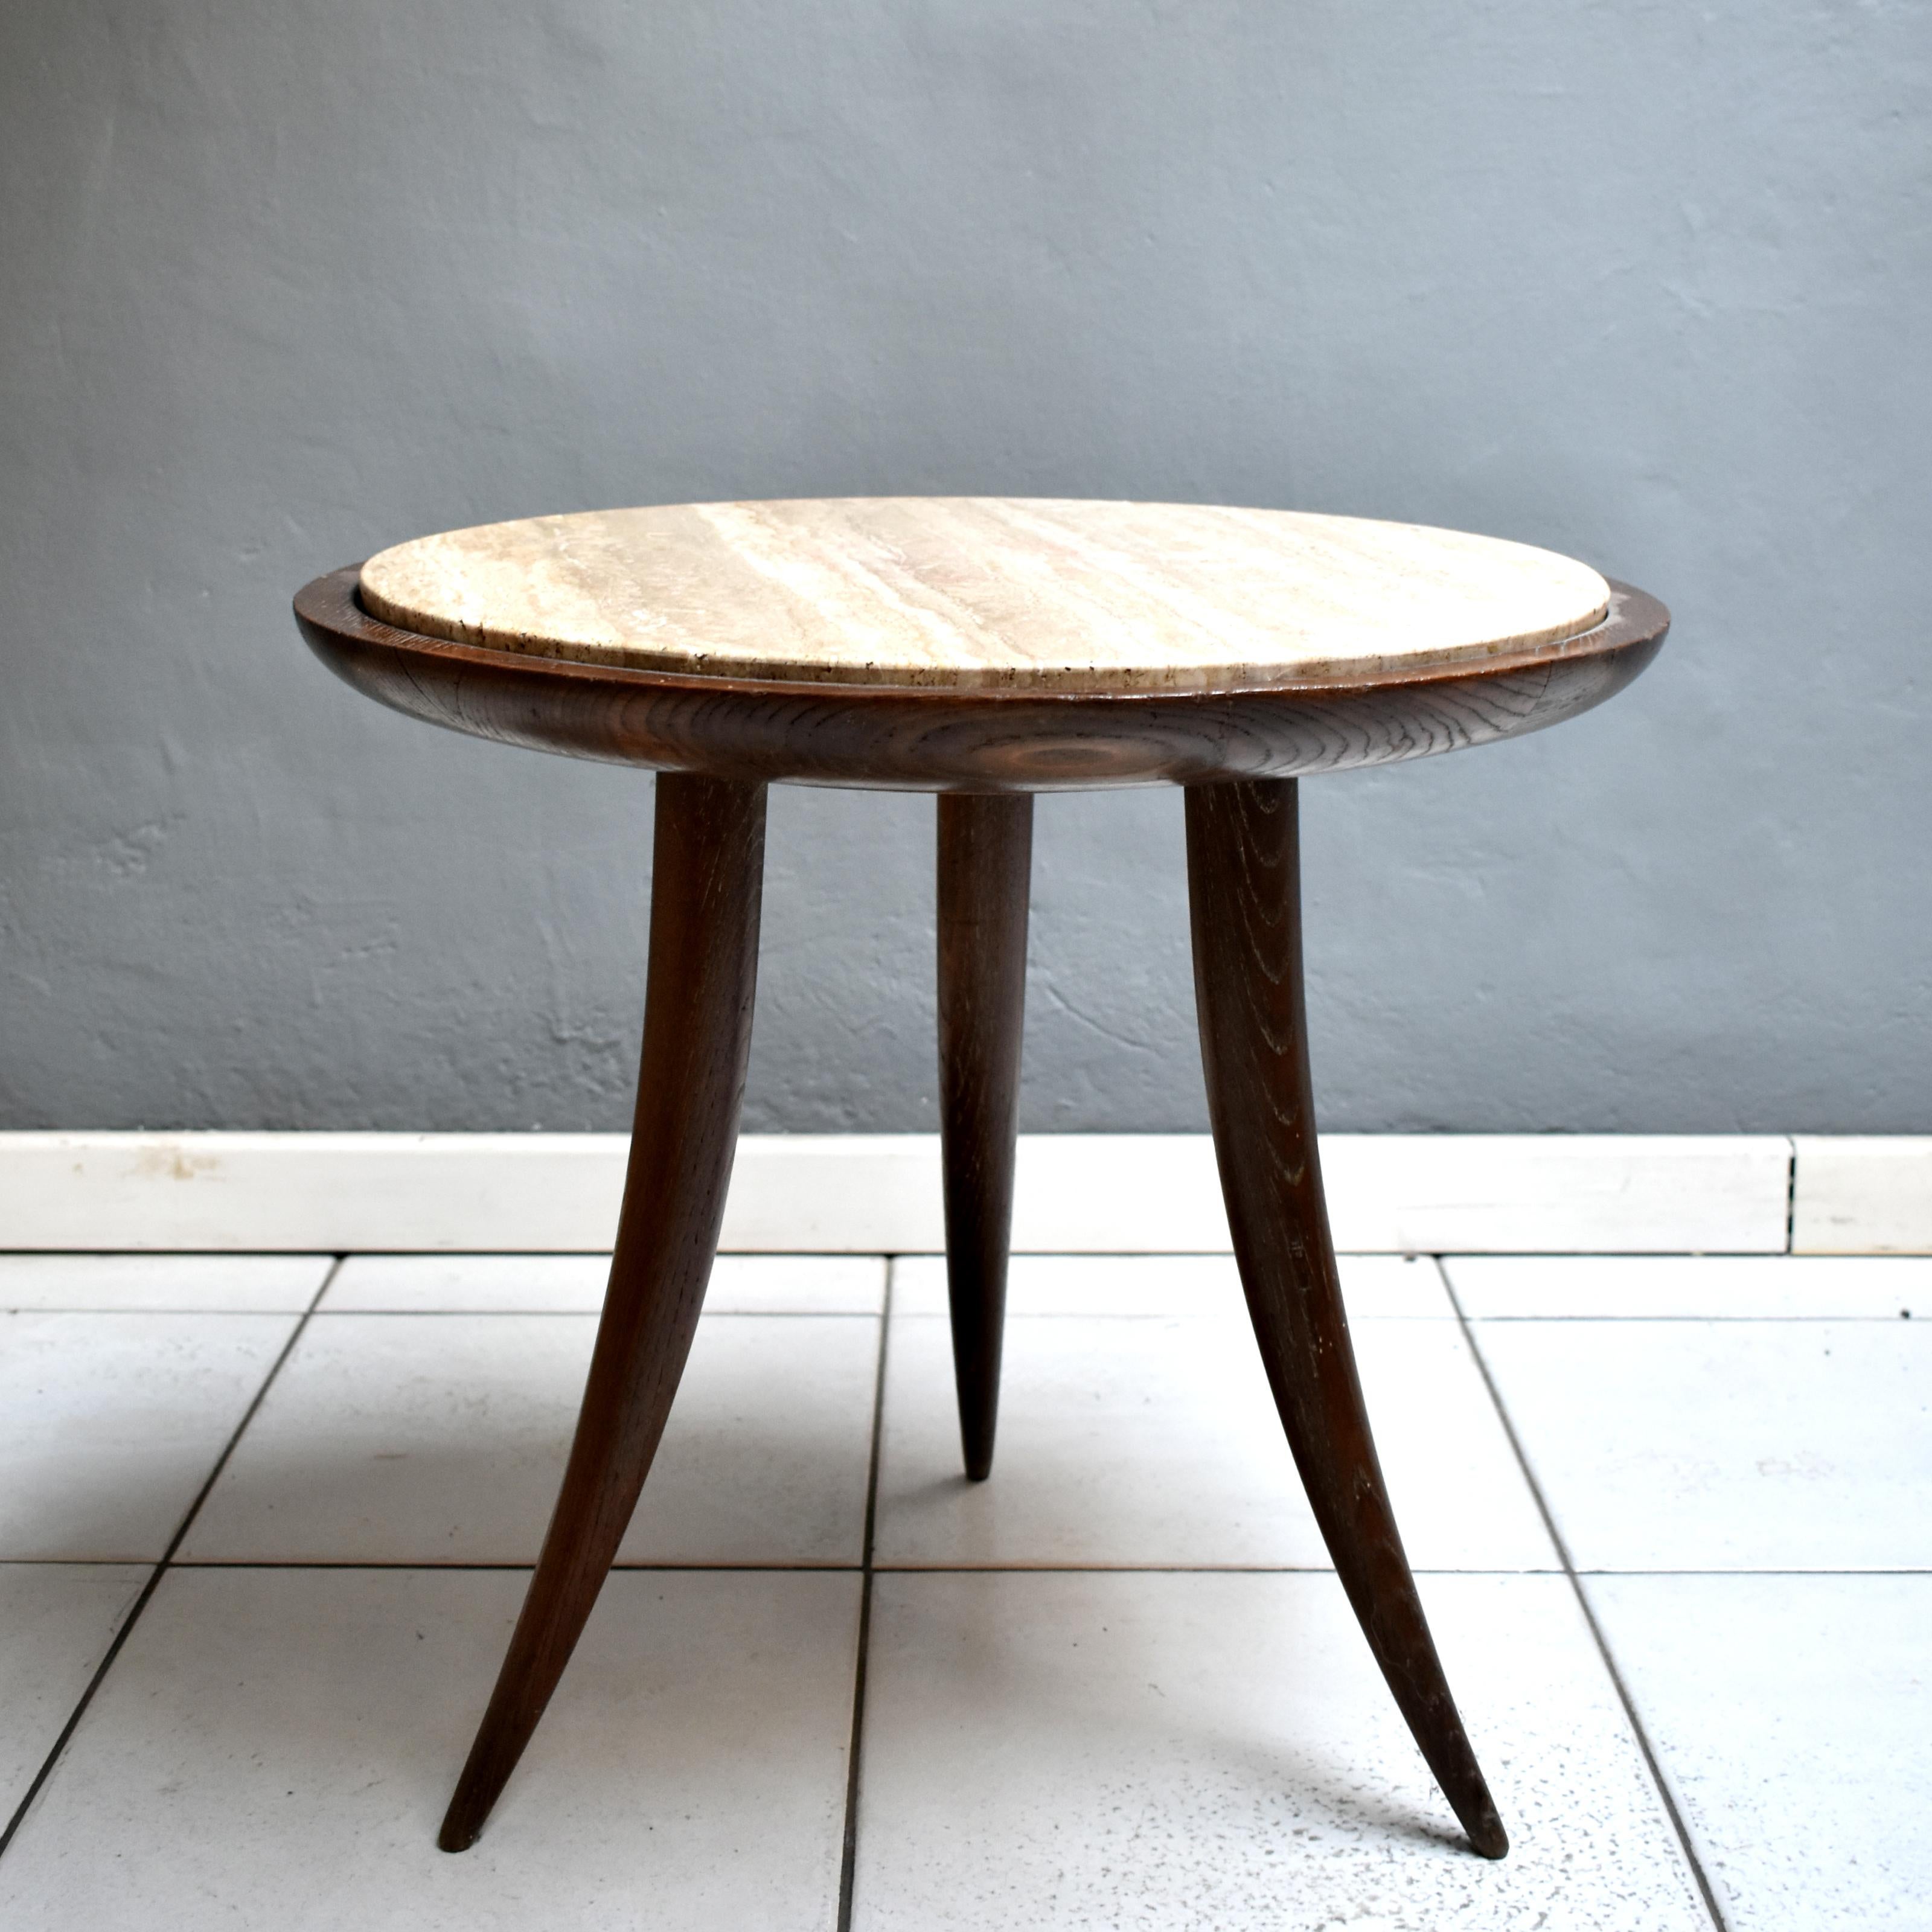 1950s Italian Round Coffee Table in Wood and Travertine Marble Top For Sale 1